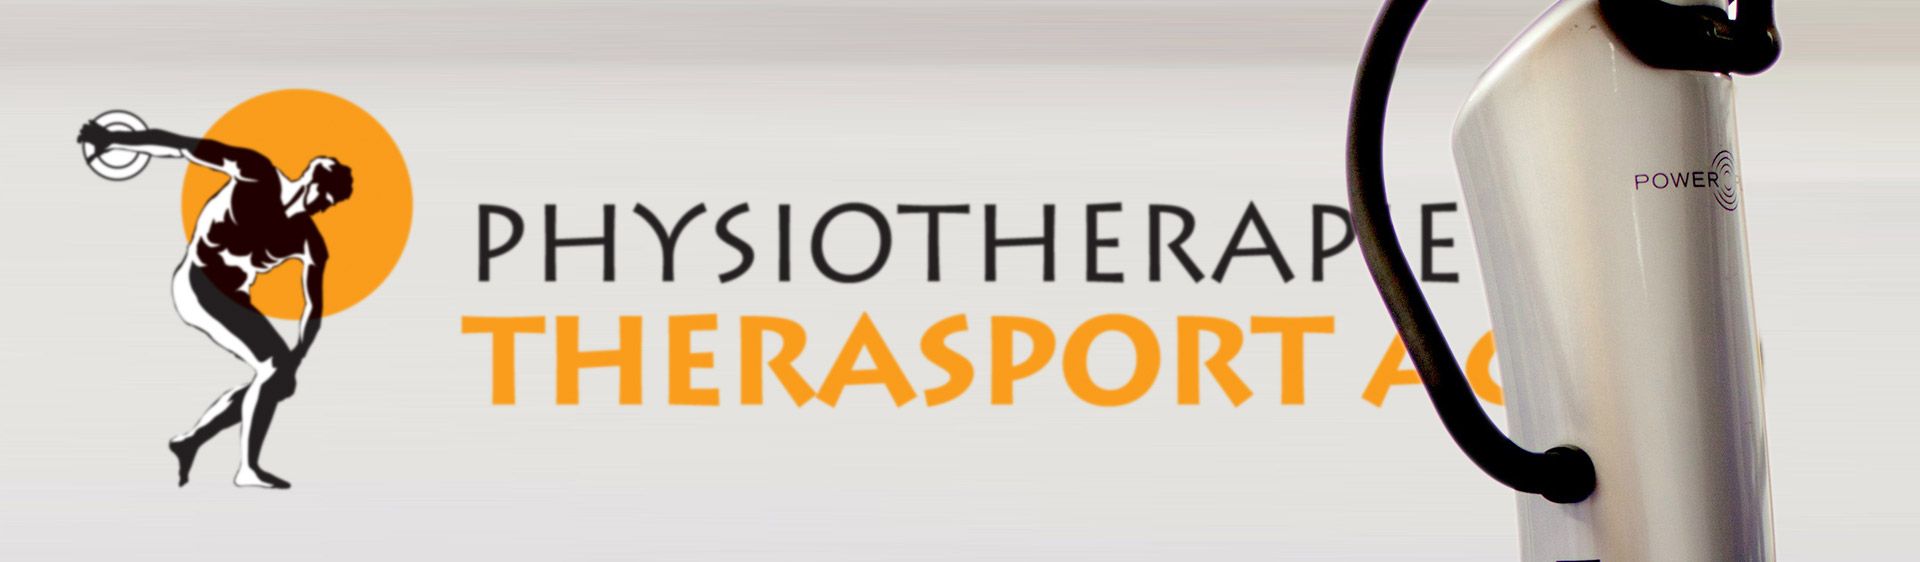 Physiotherapie Therasport AG Banner